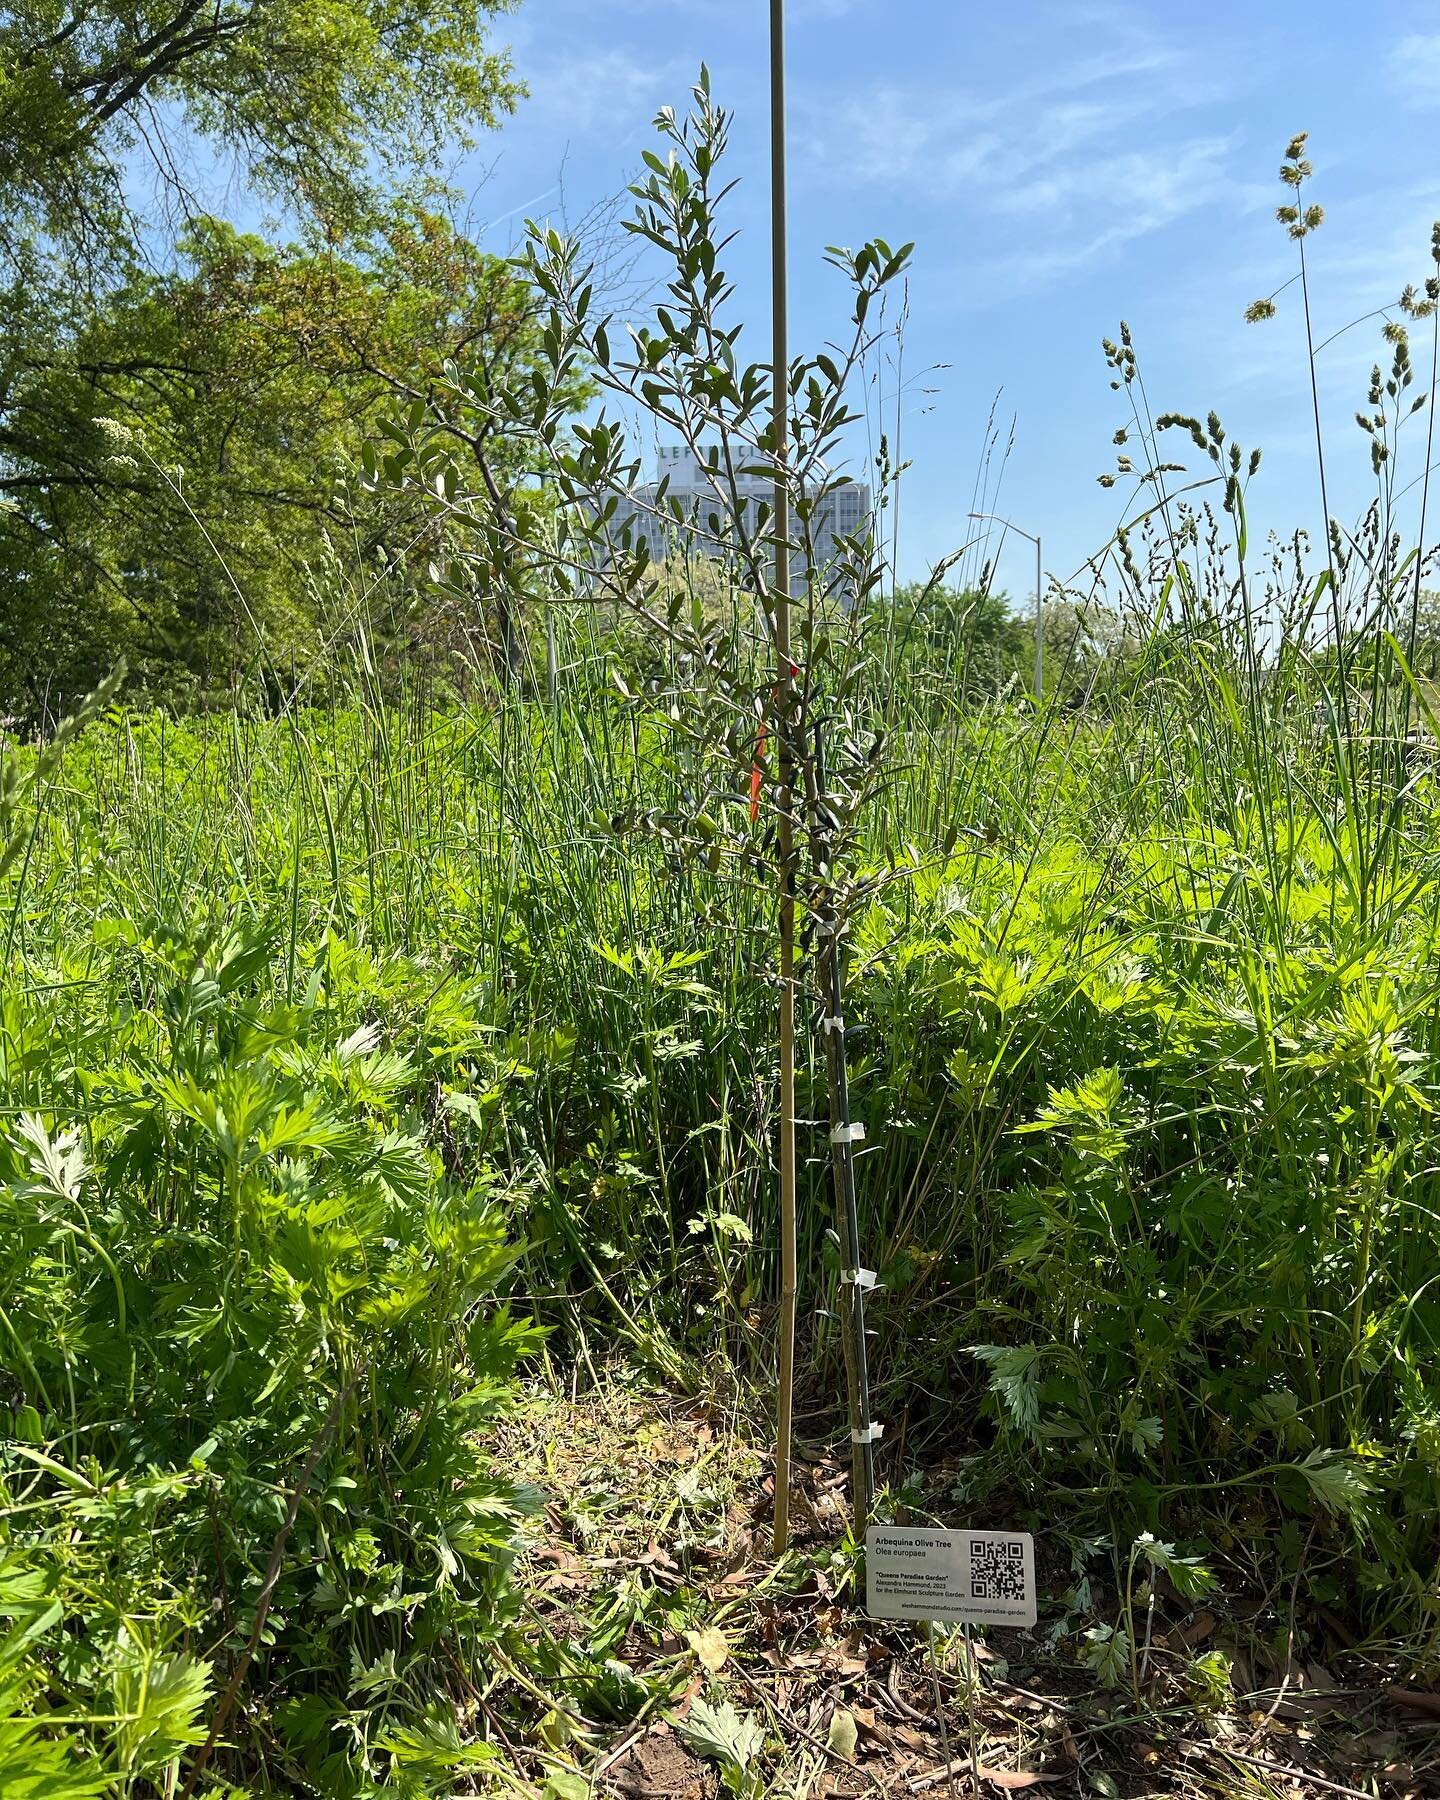 &ldquo;Everly Object that is loved forms the center of a paradise.&rdquo; 🌼🫒🕊️-- William Blake

I planted this olive tree at the Elmhurst Sculpture Garden to contribute to the community of plants, animals, people and objects that exist in this pla